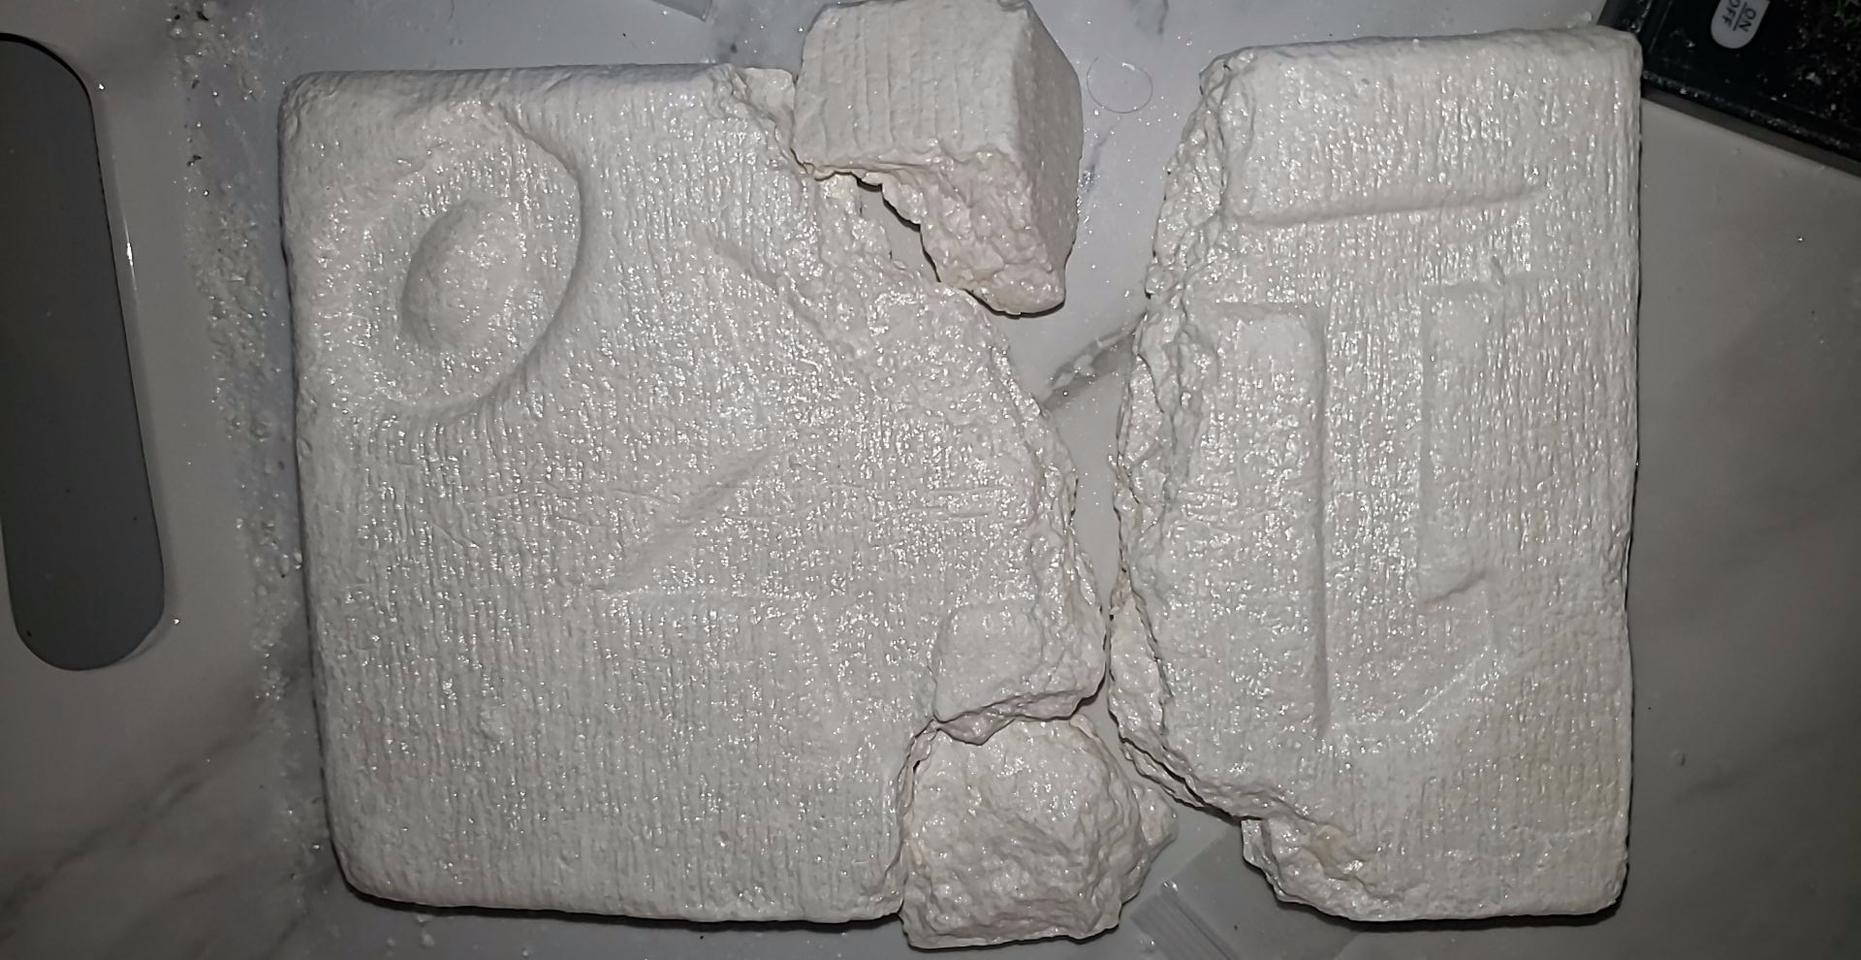 16 Gram Colombian Cocaine – Pure uncut from the Brick US-US